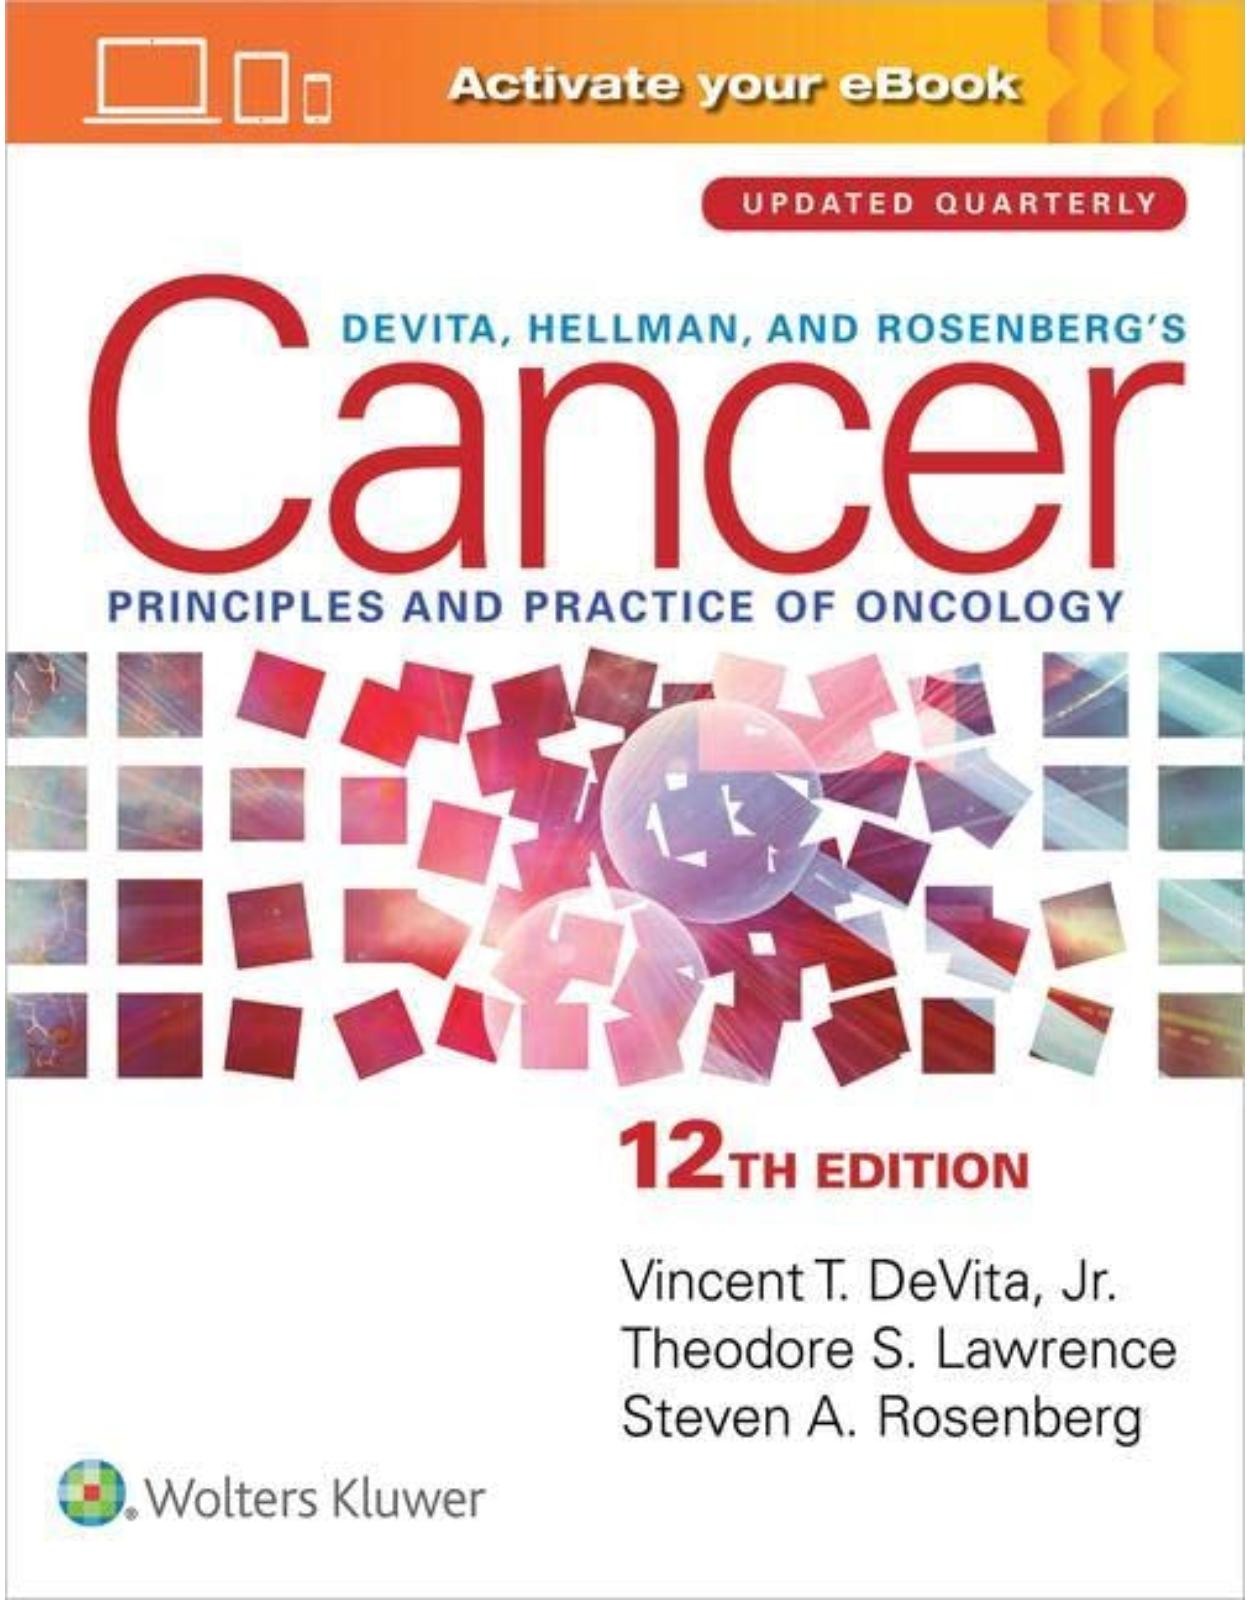 DeVita, Hellman, and Rosenberg’s Cancer: Principles & Practice of Oncology